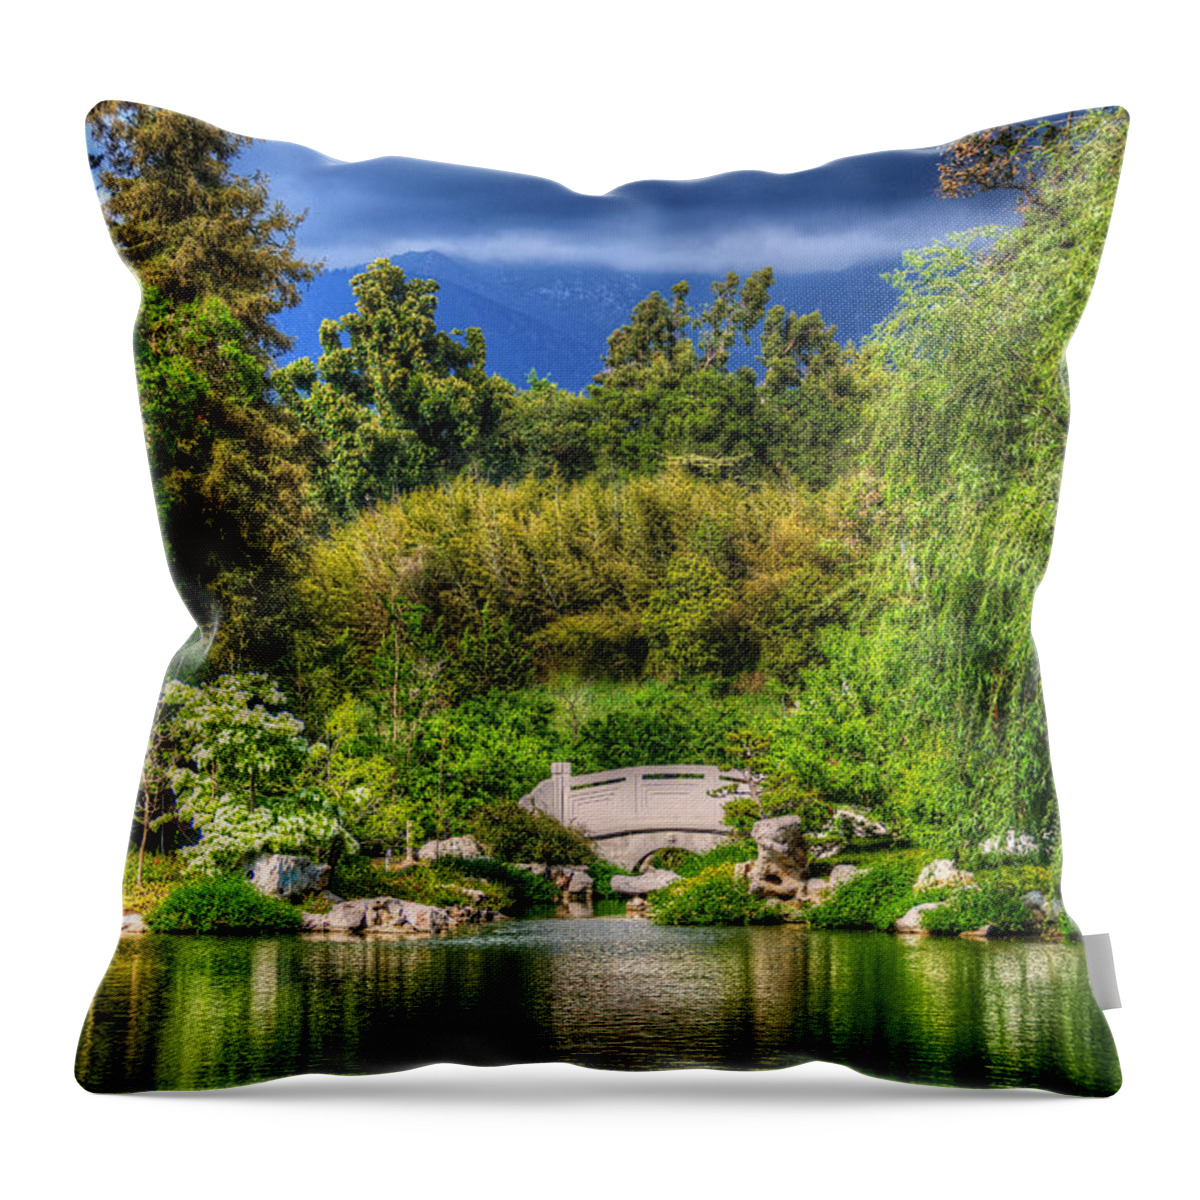 Chinese Throw Pillow featuring the photograph The Bridge 12 by Richard J Cassato